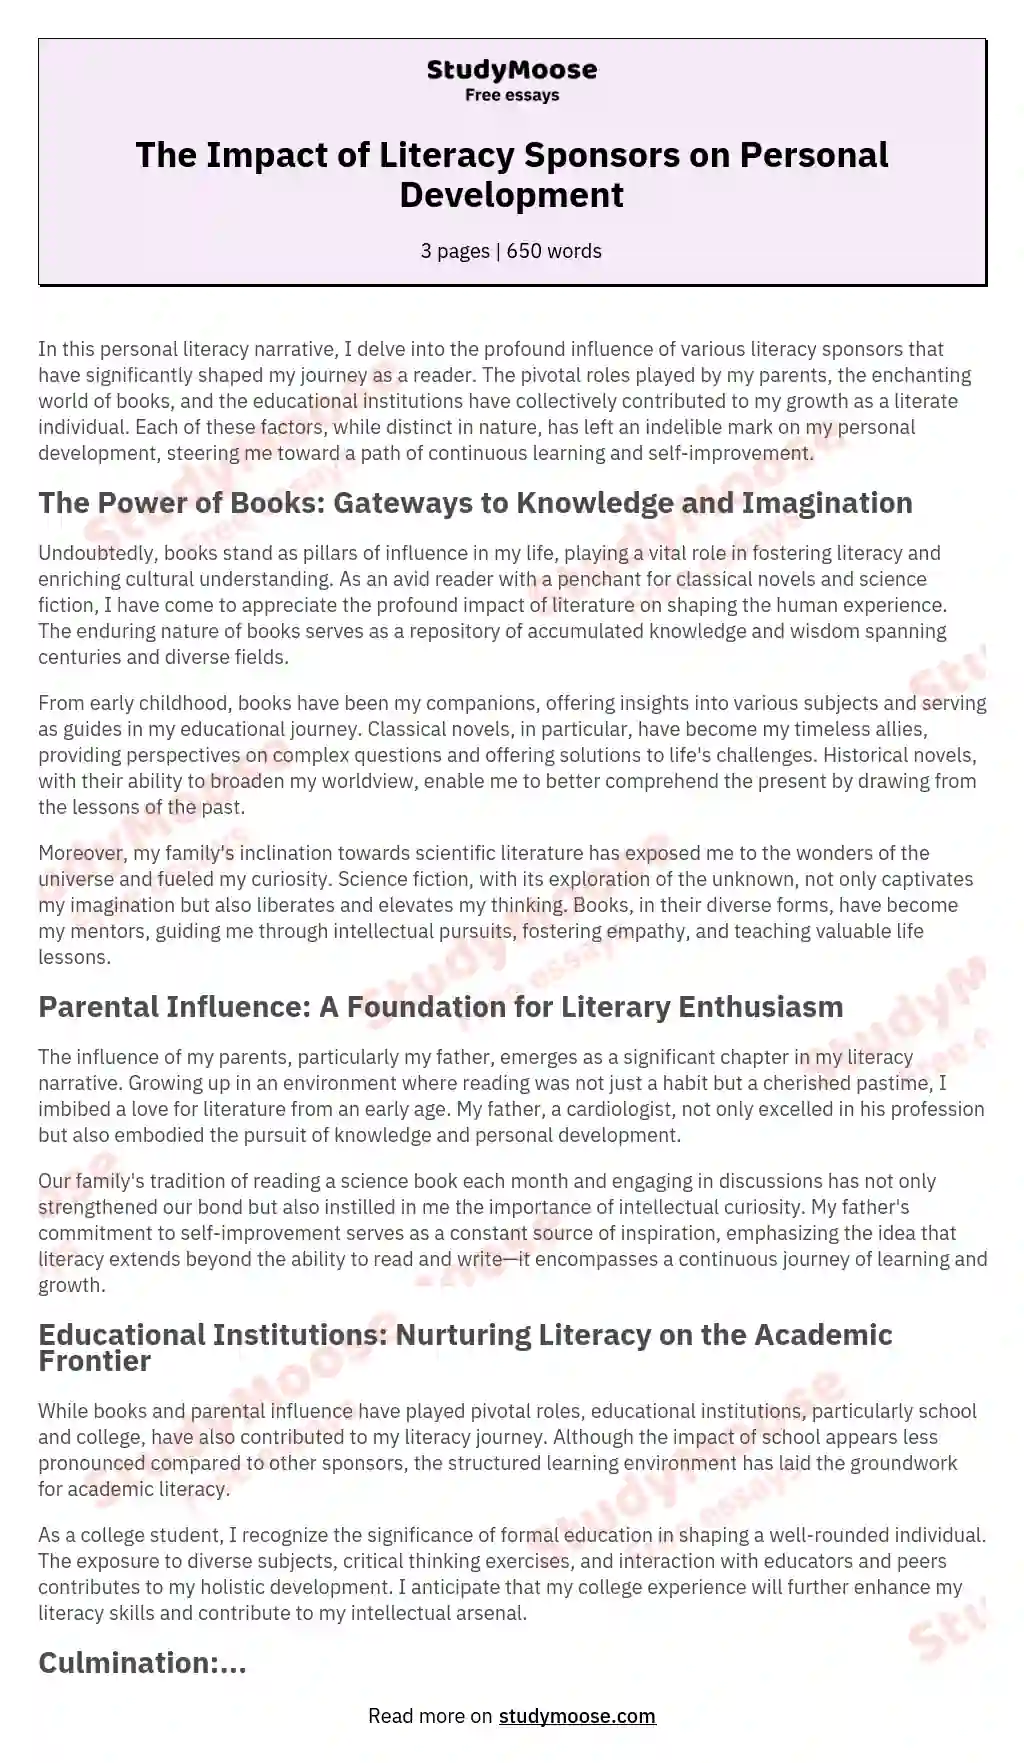 The Impact of Literacy Sponsors on Personal Development essay